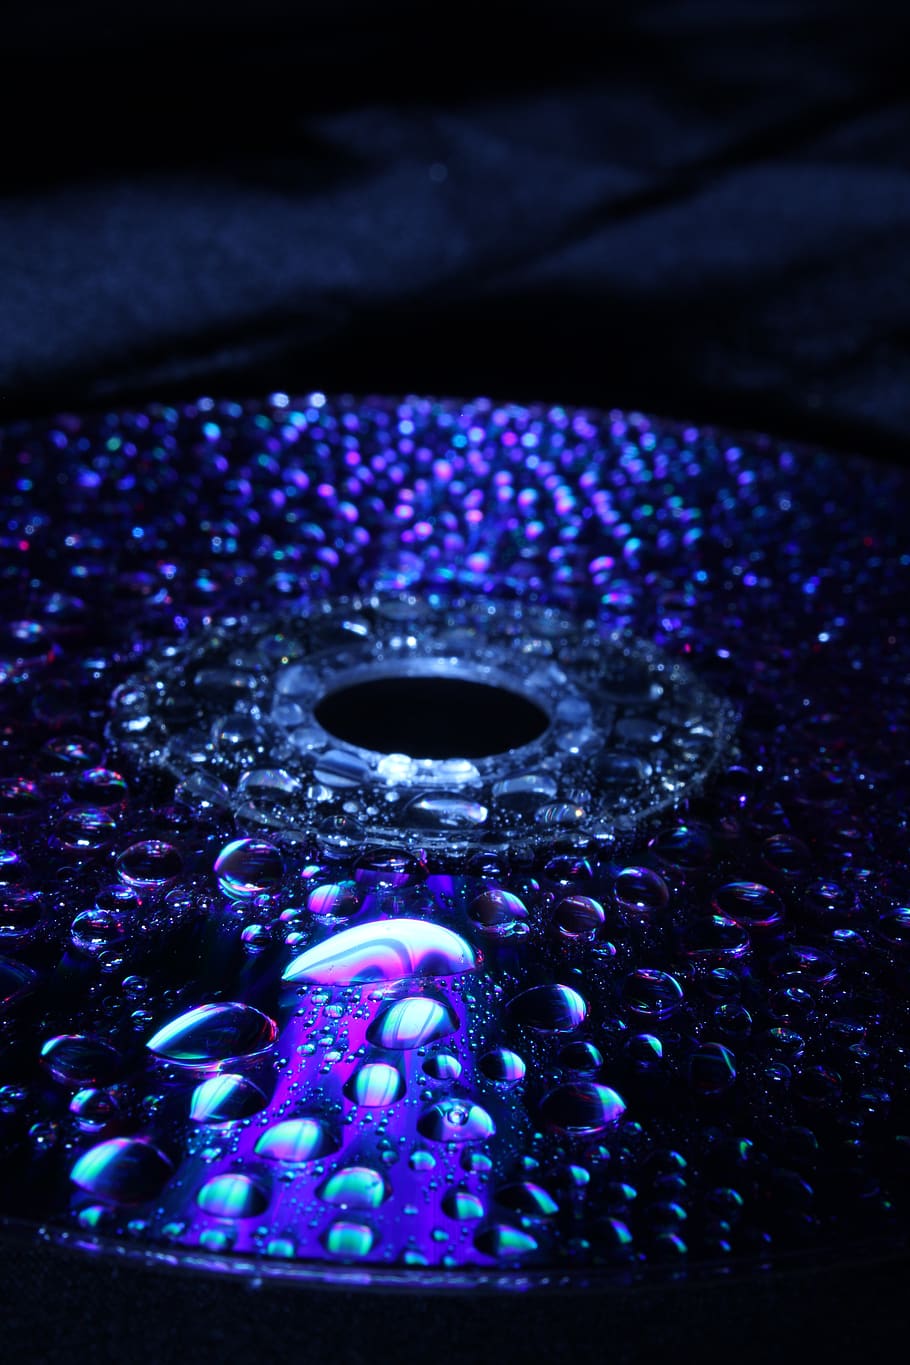 floppy disk, water, drip, blue, indoors, close-up, domestic room, household equipment, nature, night